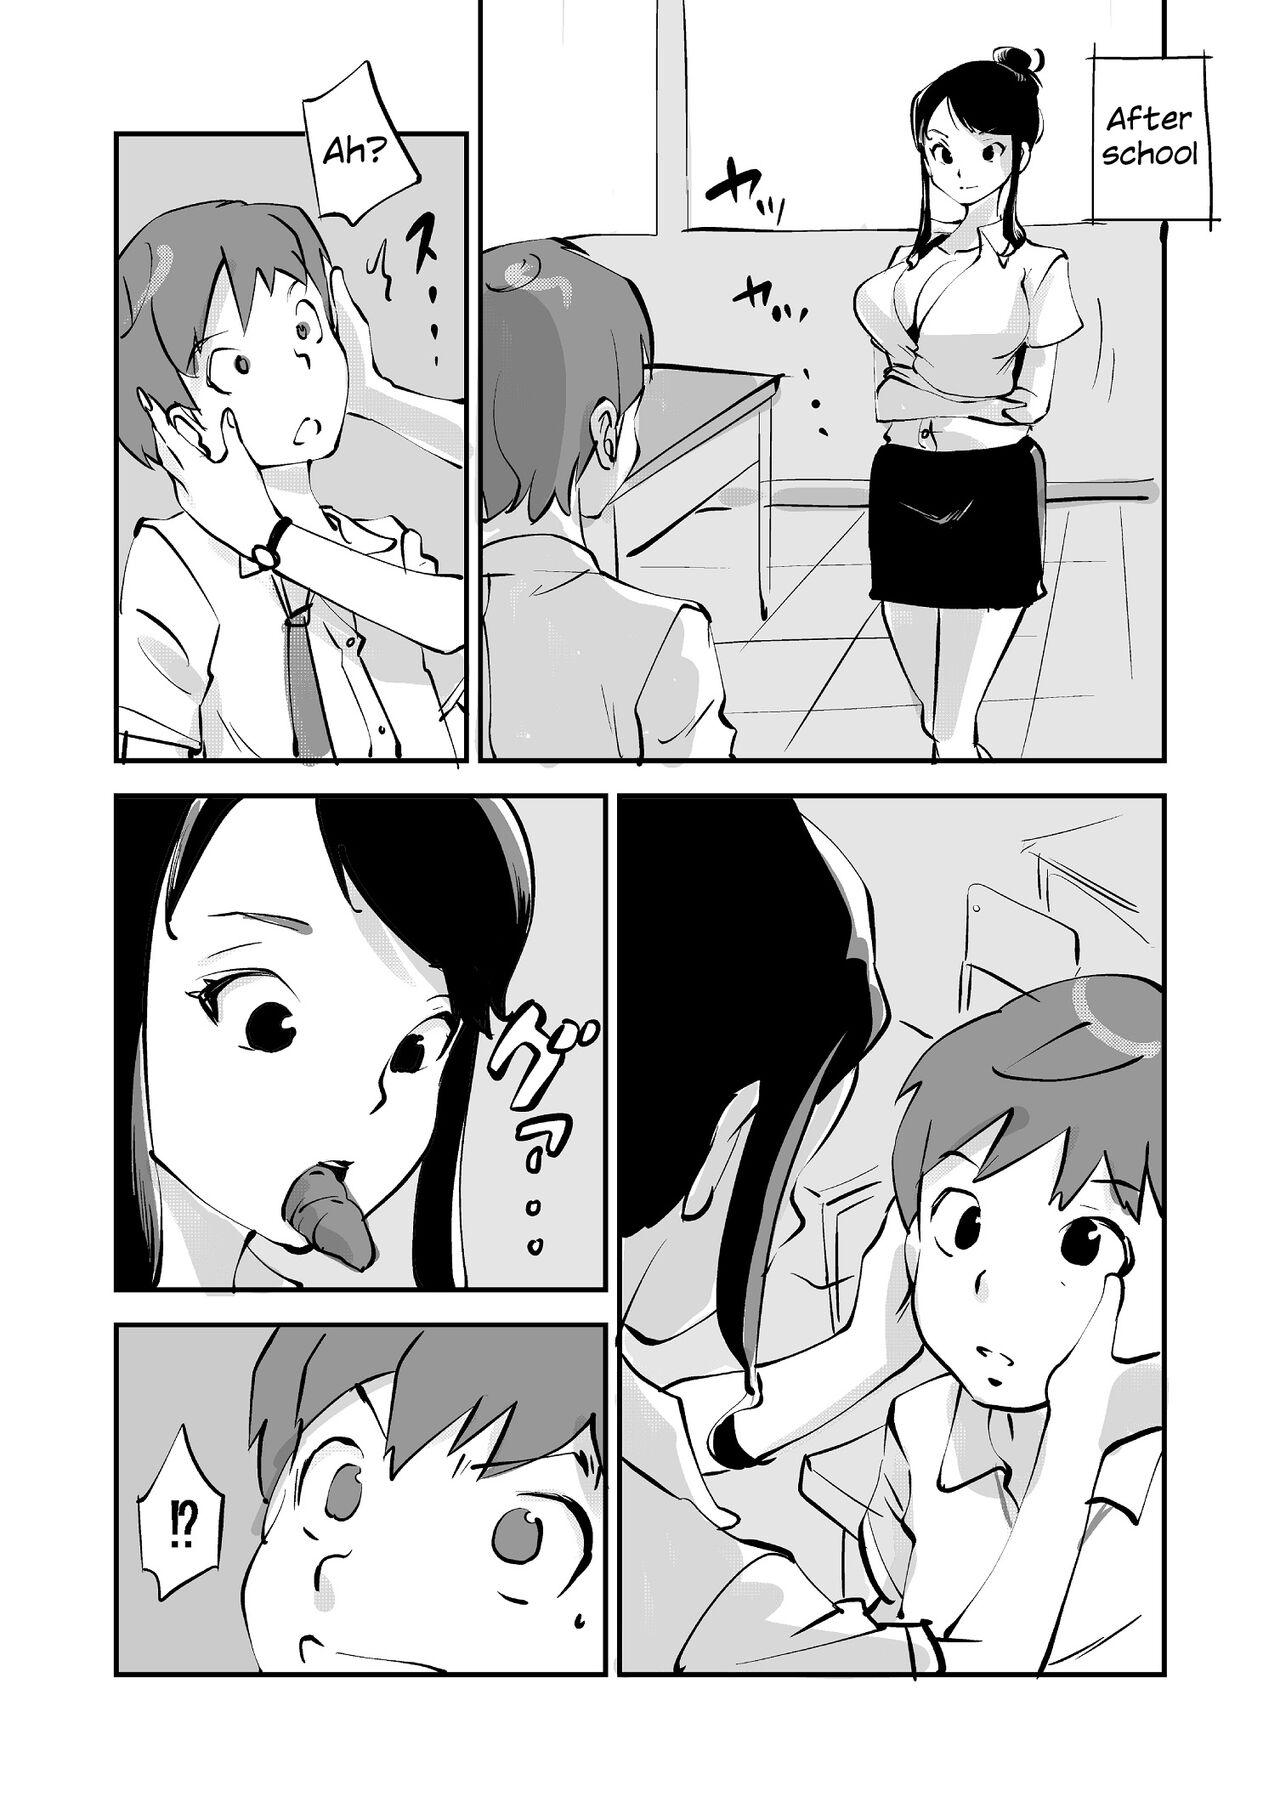 The Flesh Swapper Manga Best Blowjobs Ever - Page 3